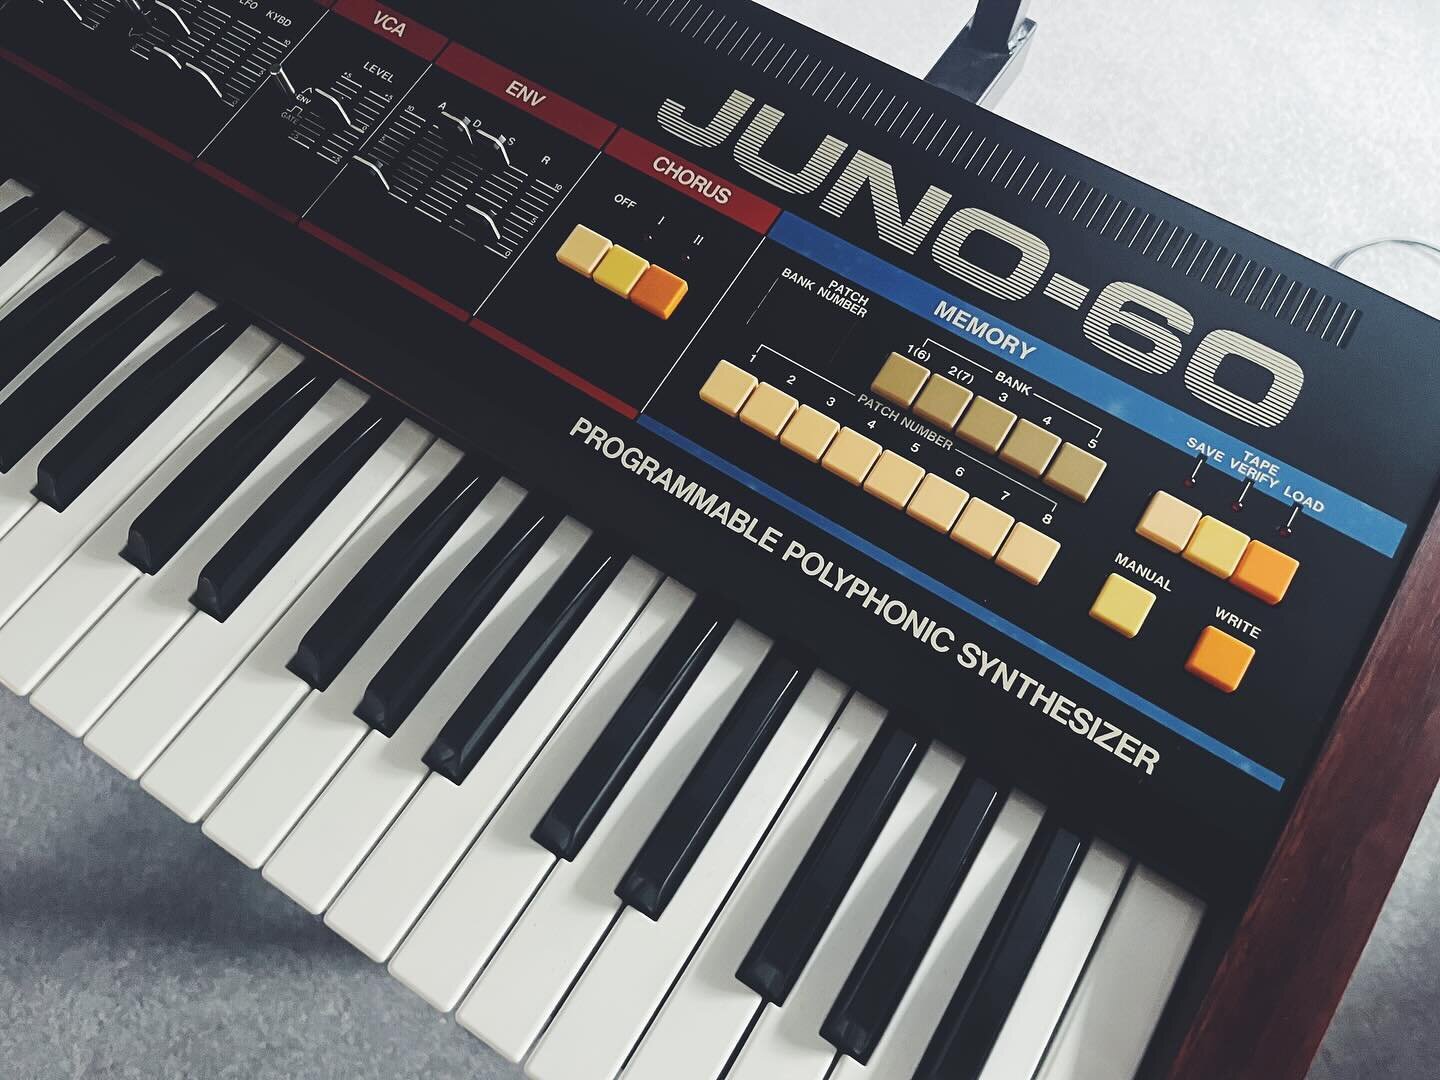 😮&zwj;💨😭

a heartwarming day it was welcoming this piece of history to the studio. from all the way across the pond in Poland, a sincere thank you to Maciek @analogia.pl for your stunning work restoring and detailing this @rolandglobal Juno 60. Yo